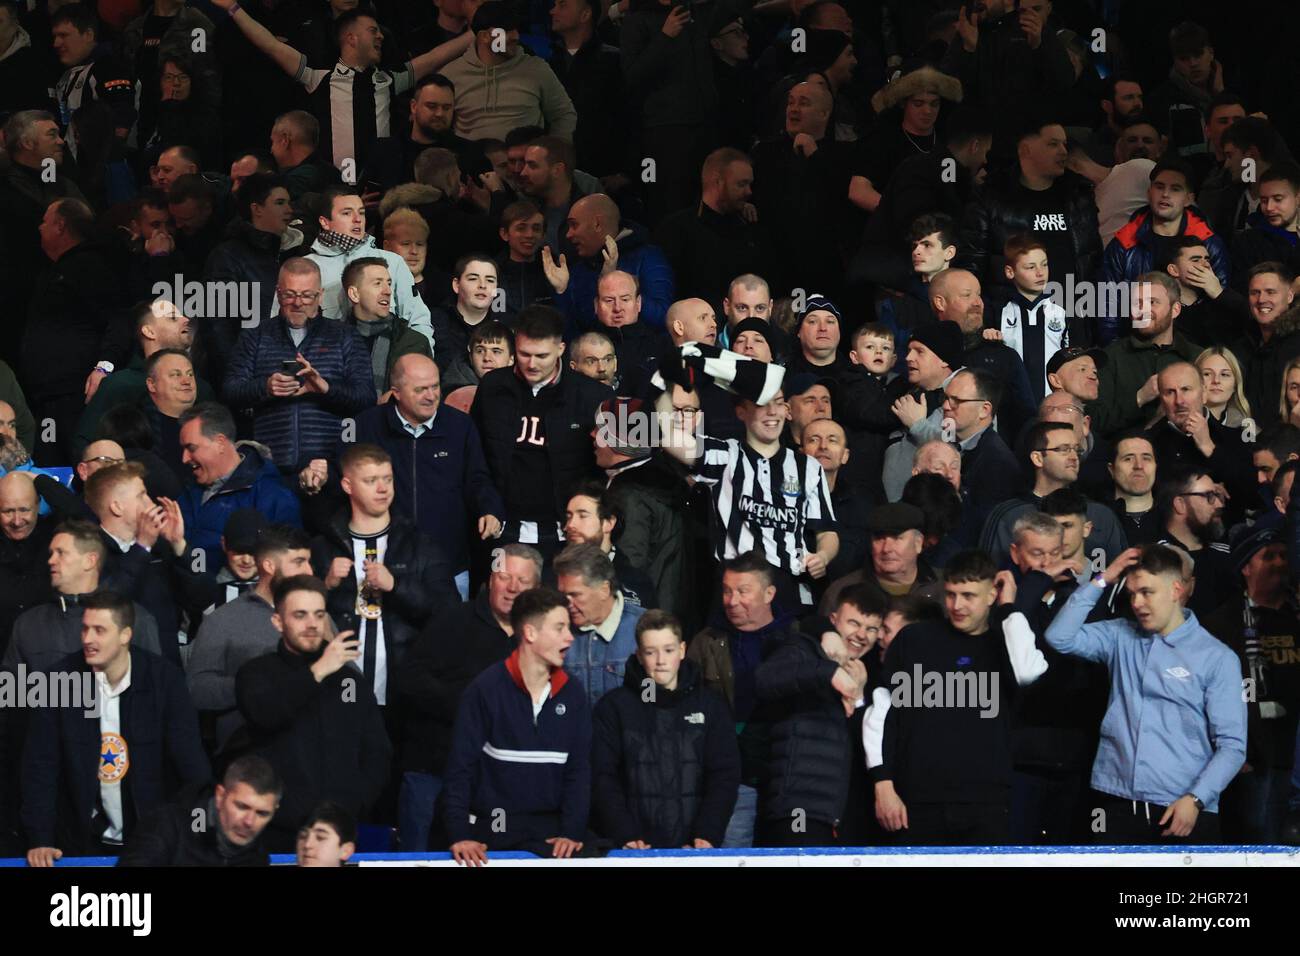 Newcastle fans celebrate the 0-1 win following the Premier League fixture Leeds United vs Newcastle United at Elland Road, Leeds, UK. 22nd Jan, 2022. Credit: News Images /Alamy Live News Stock Photo